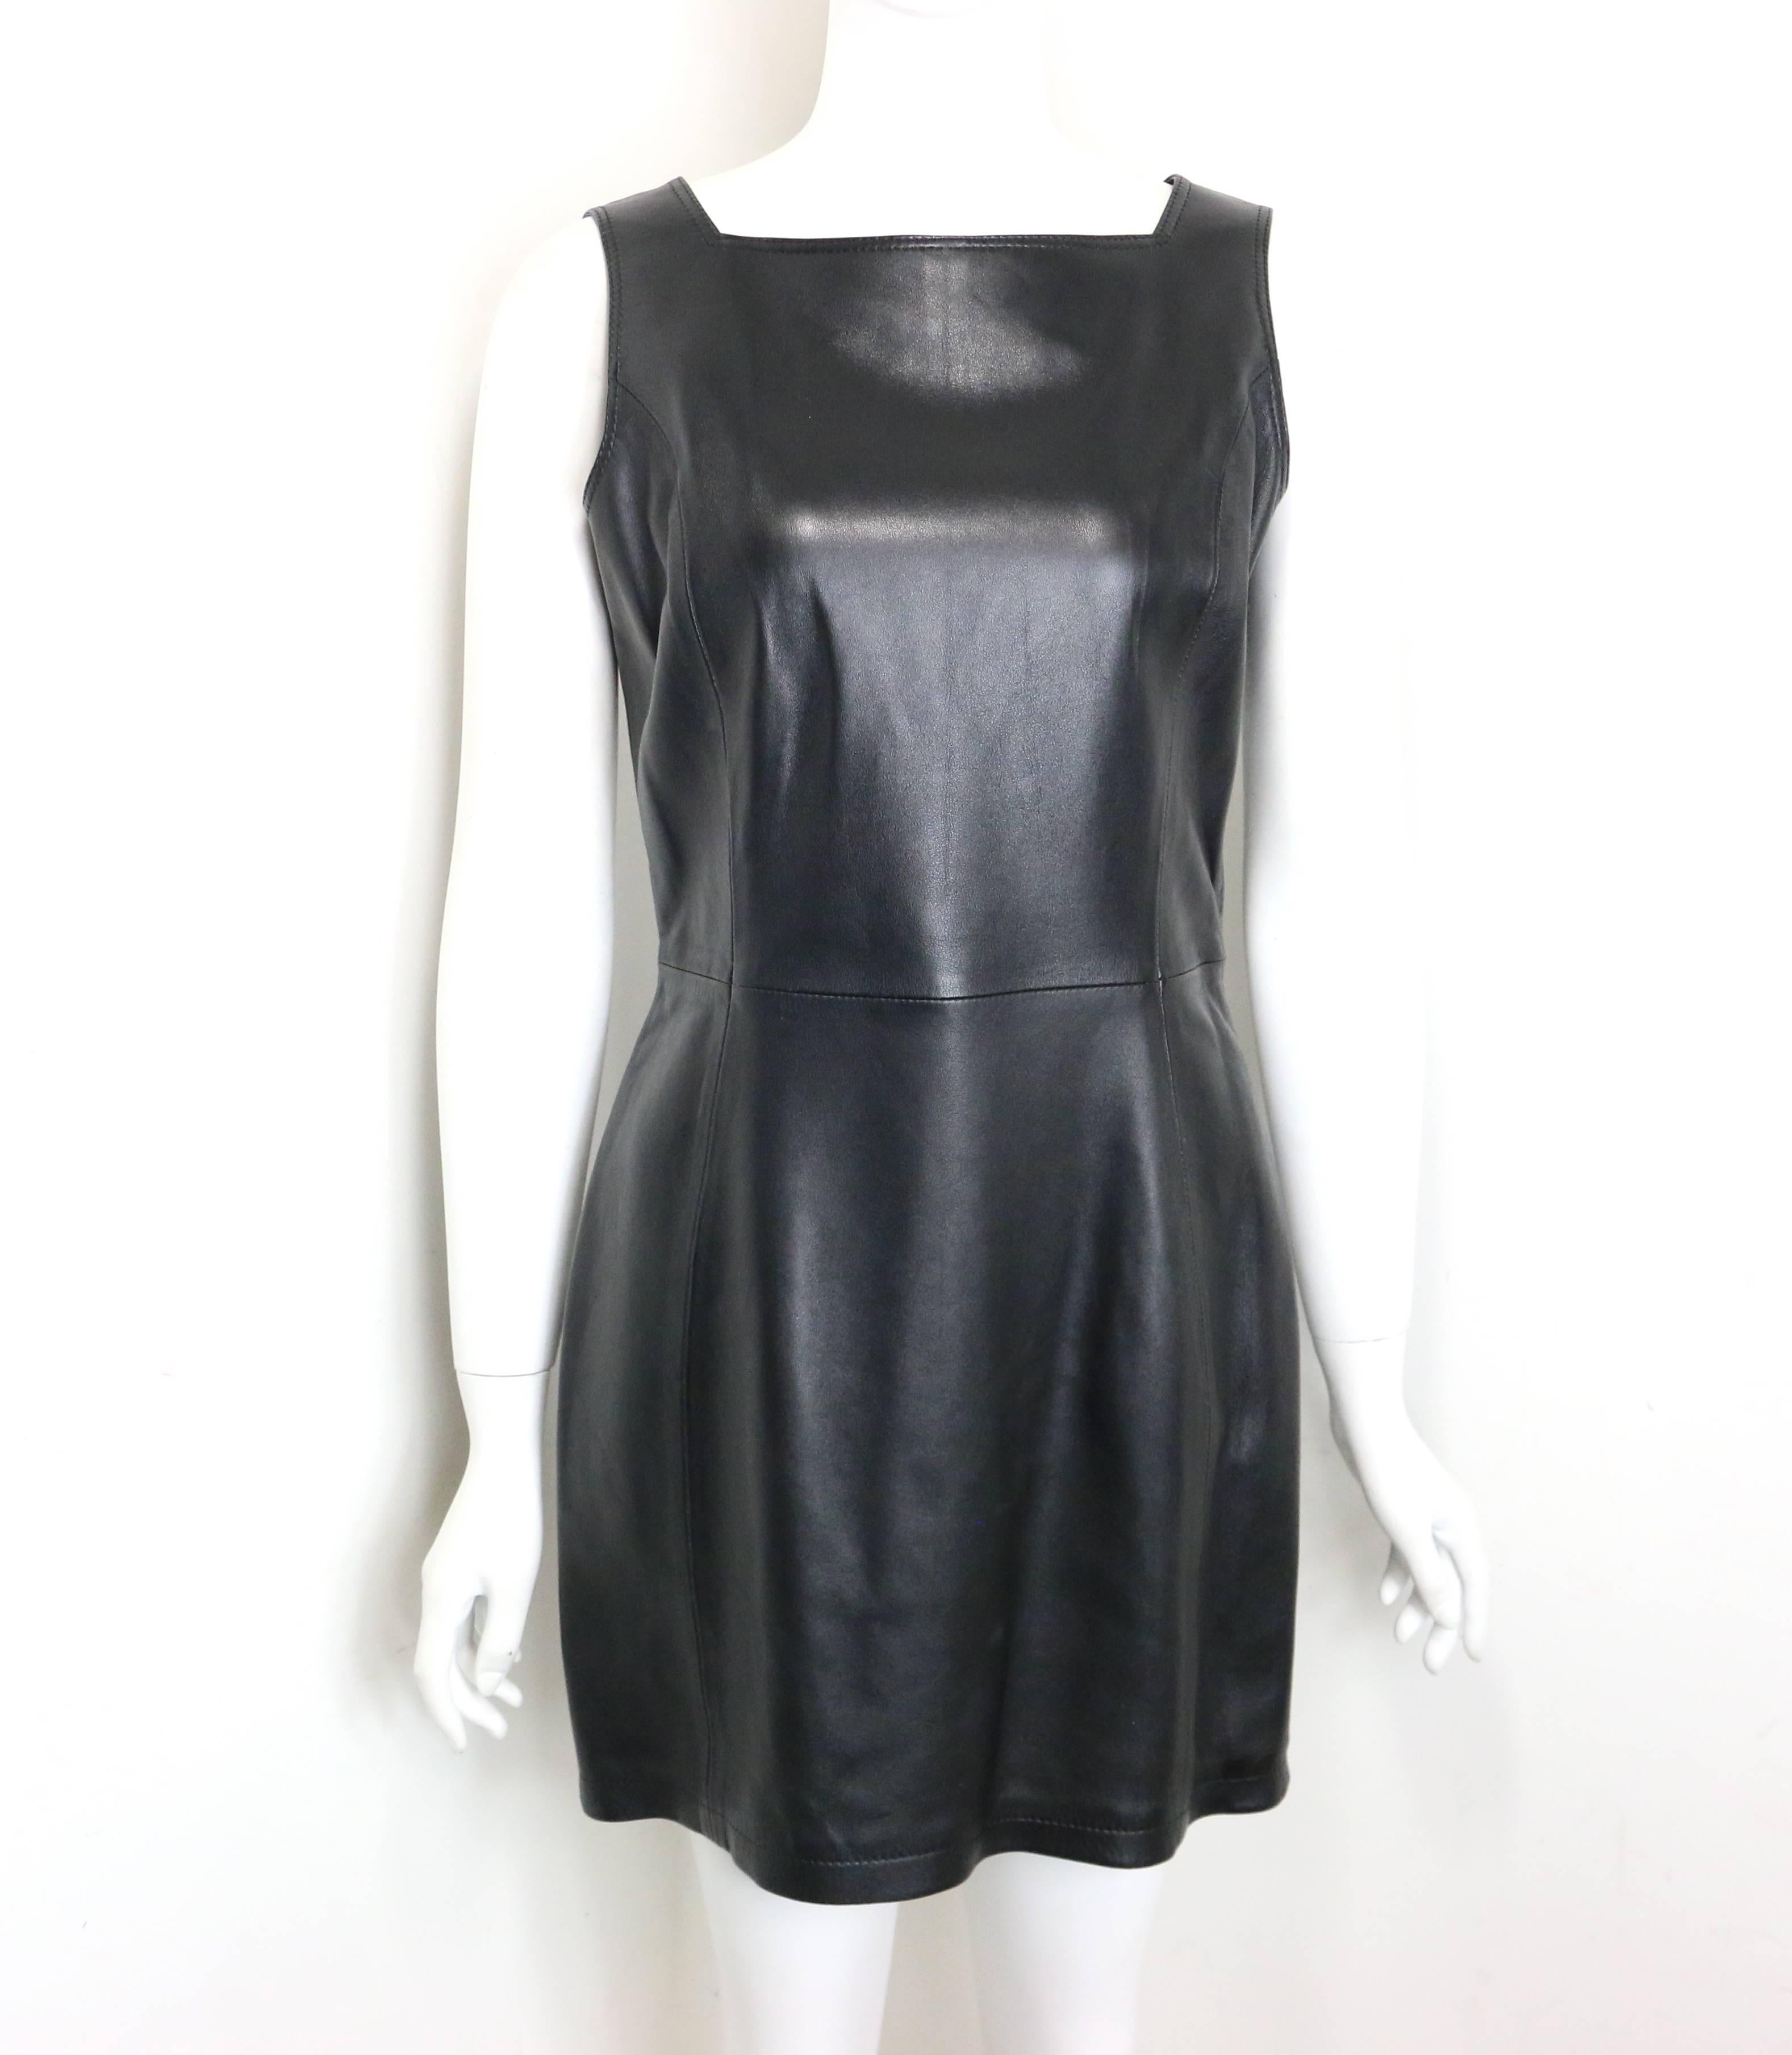 - Vintage 90s Gianni Versace iconic black leather back cut out dress. Featuring a V- shape straps at the back and round neck in front. side zipper closure. 20 years ago, one of the legendary and talented designer Gianni Versace passed away, their